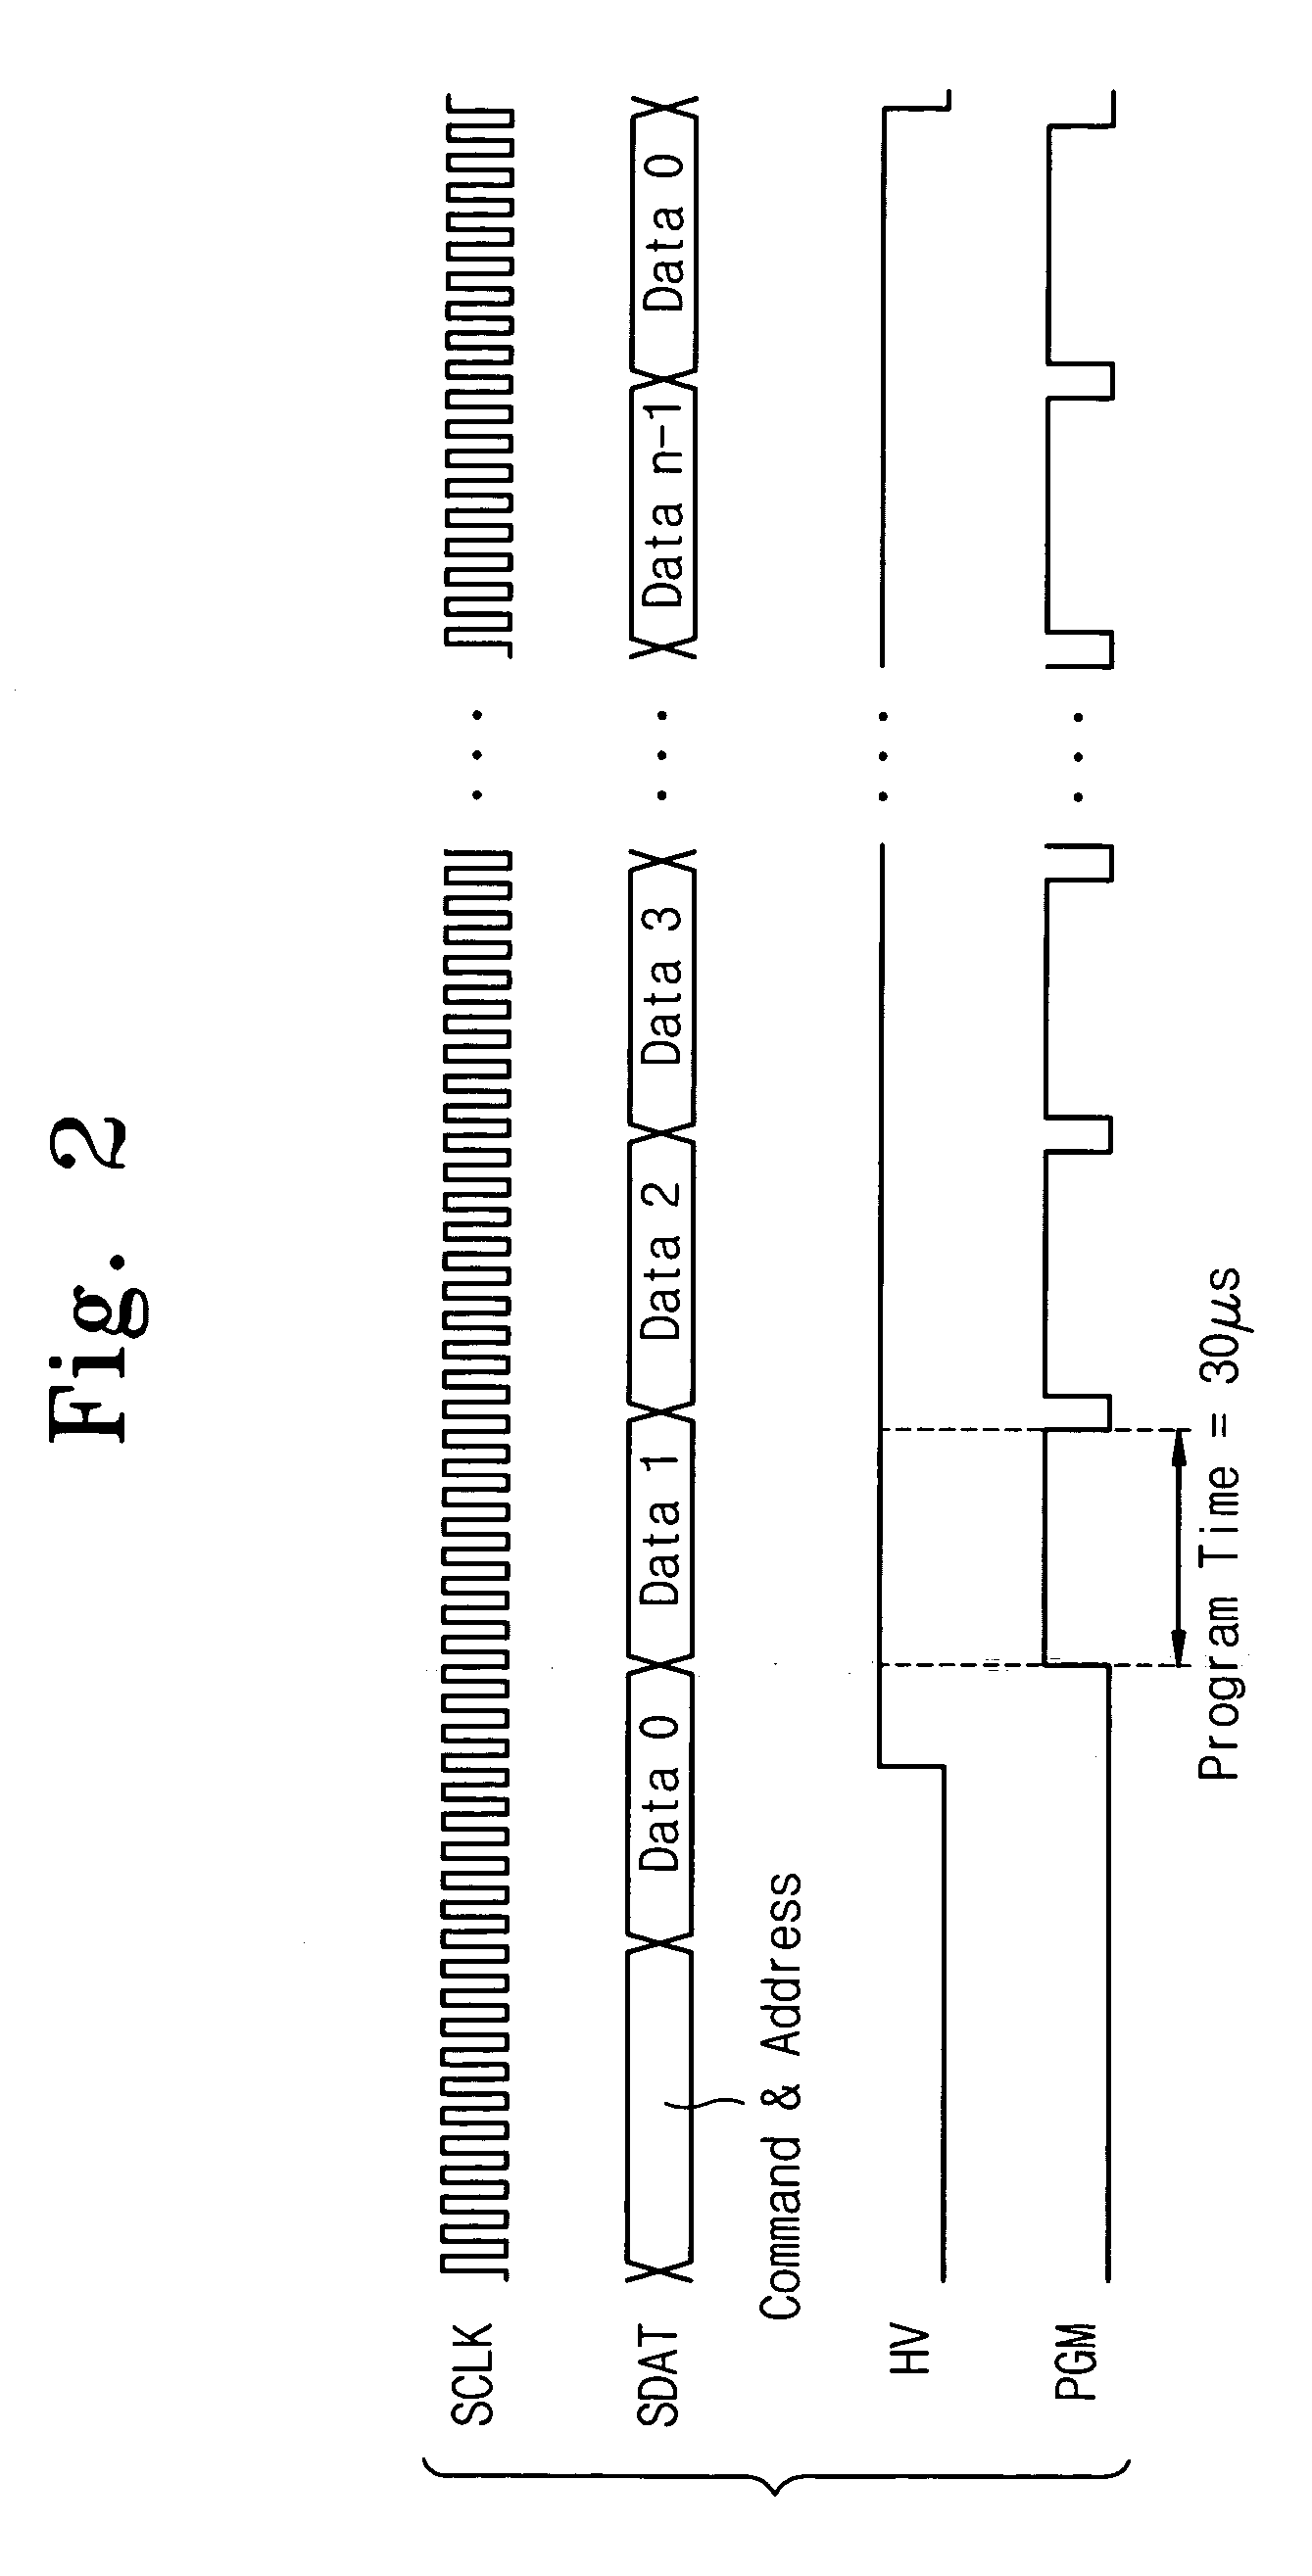 Apparatus for testing a nonvolatile memory and a method thereof